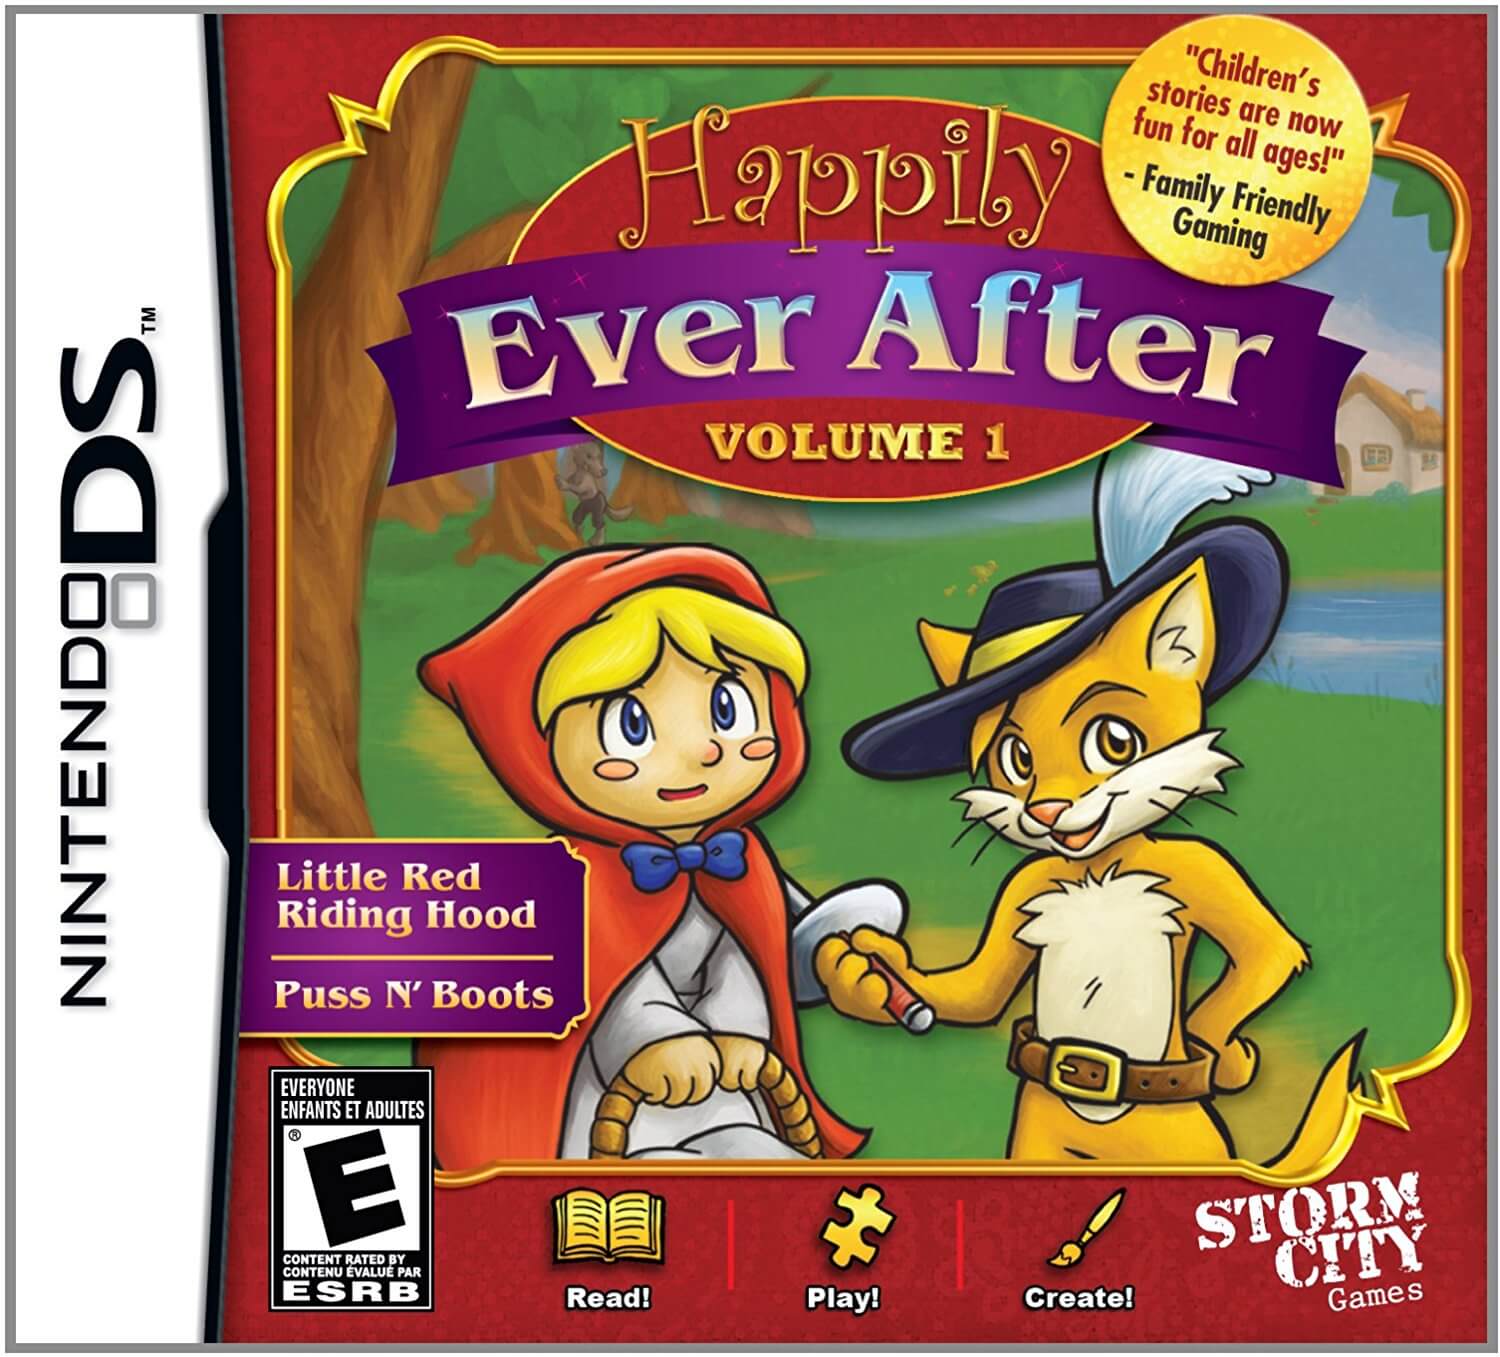 Happily Ever After Volume 1